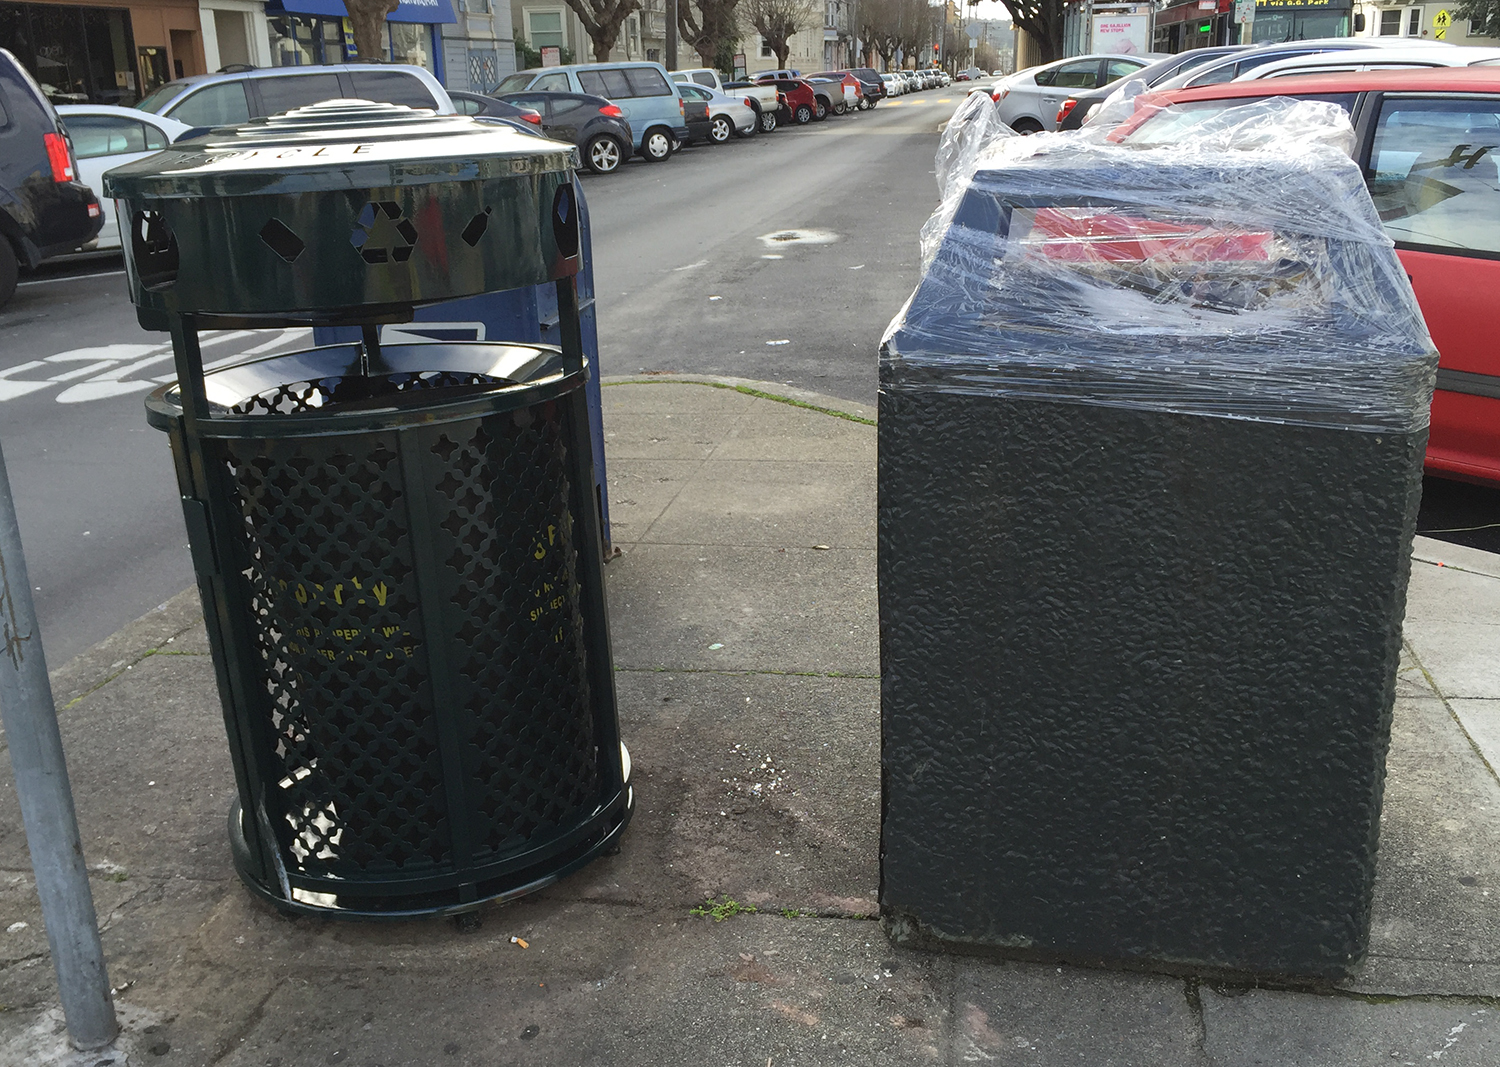 The new public garbage can (L) showing up on the streets of the Richmond District